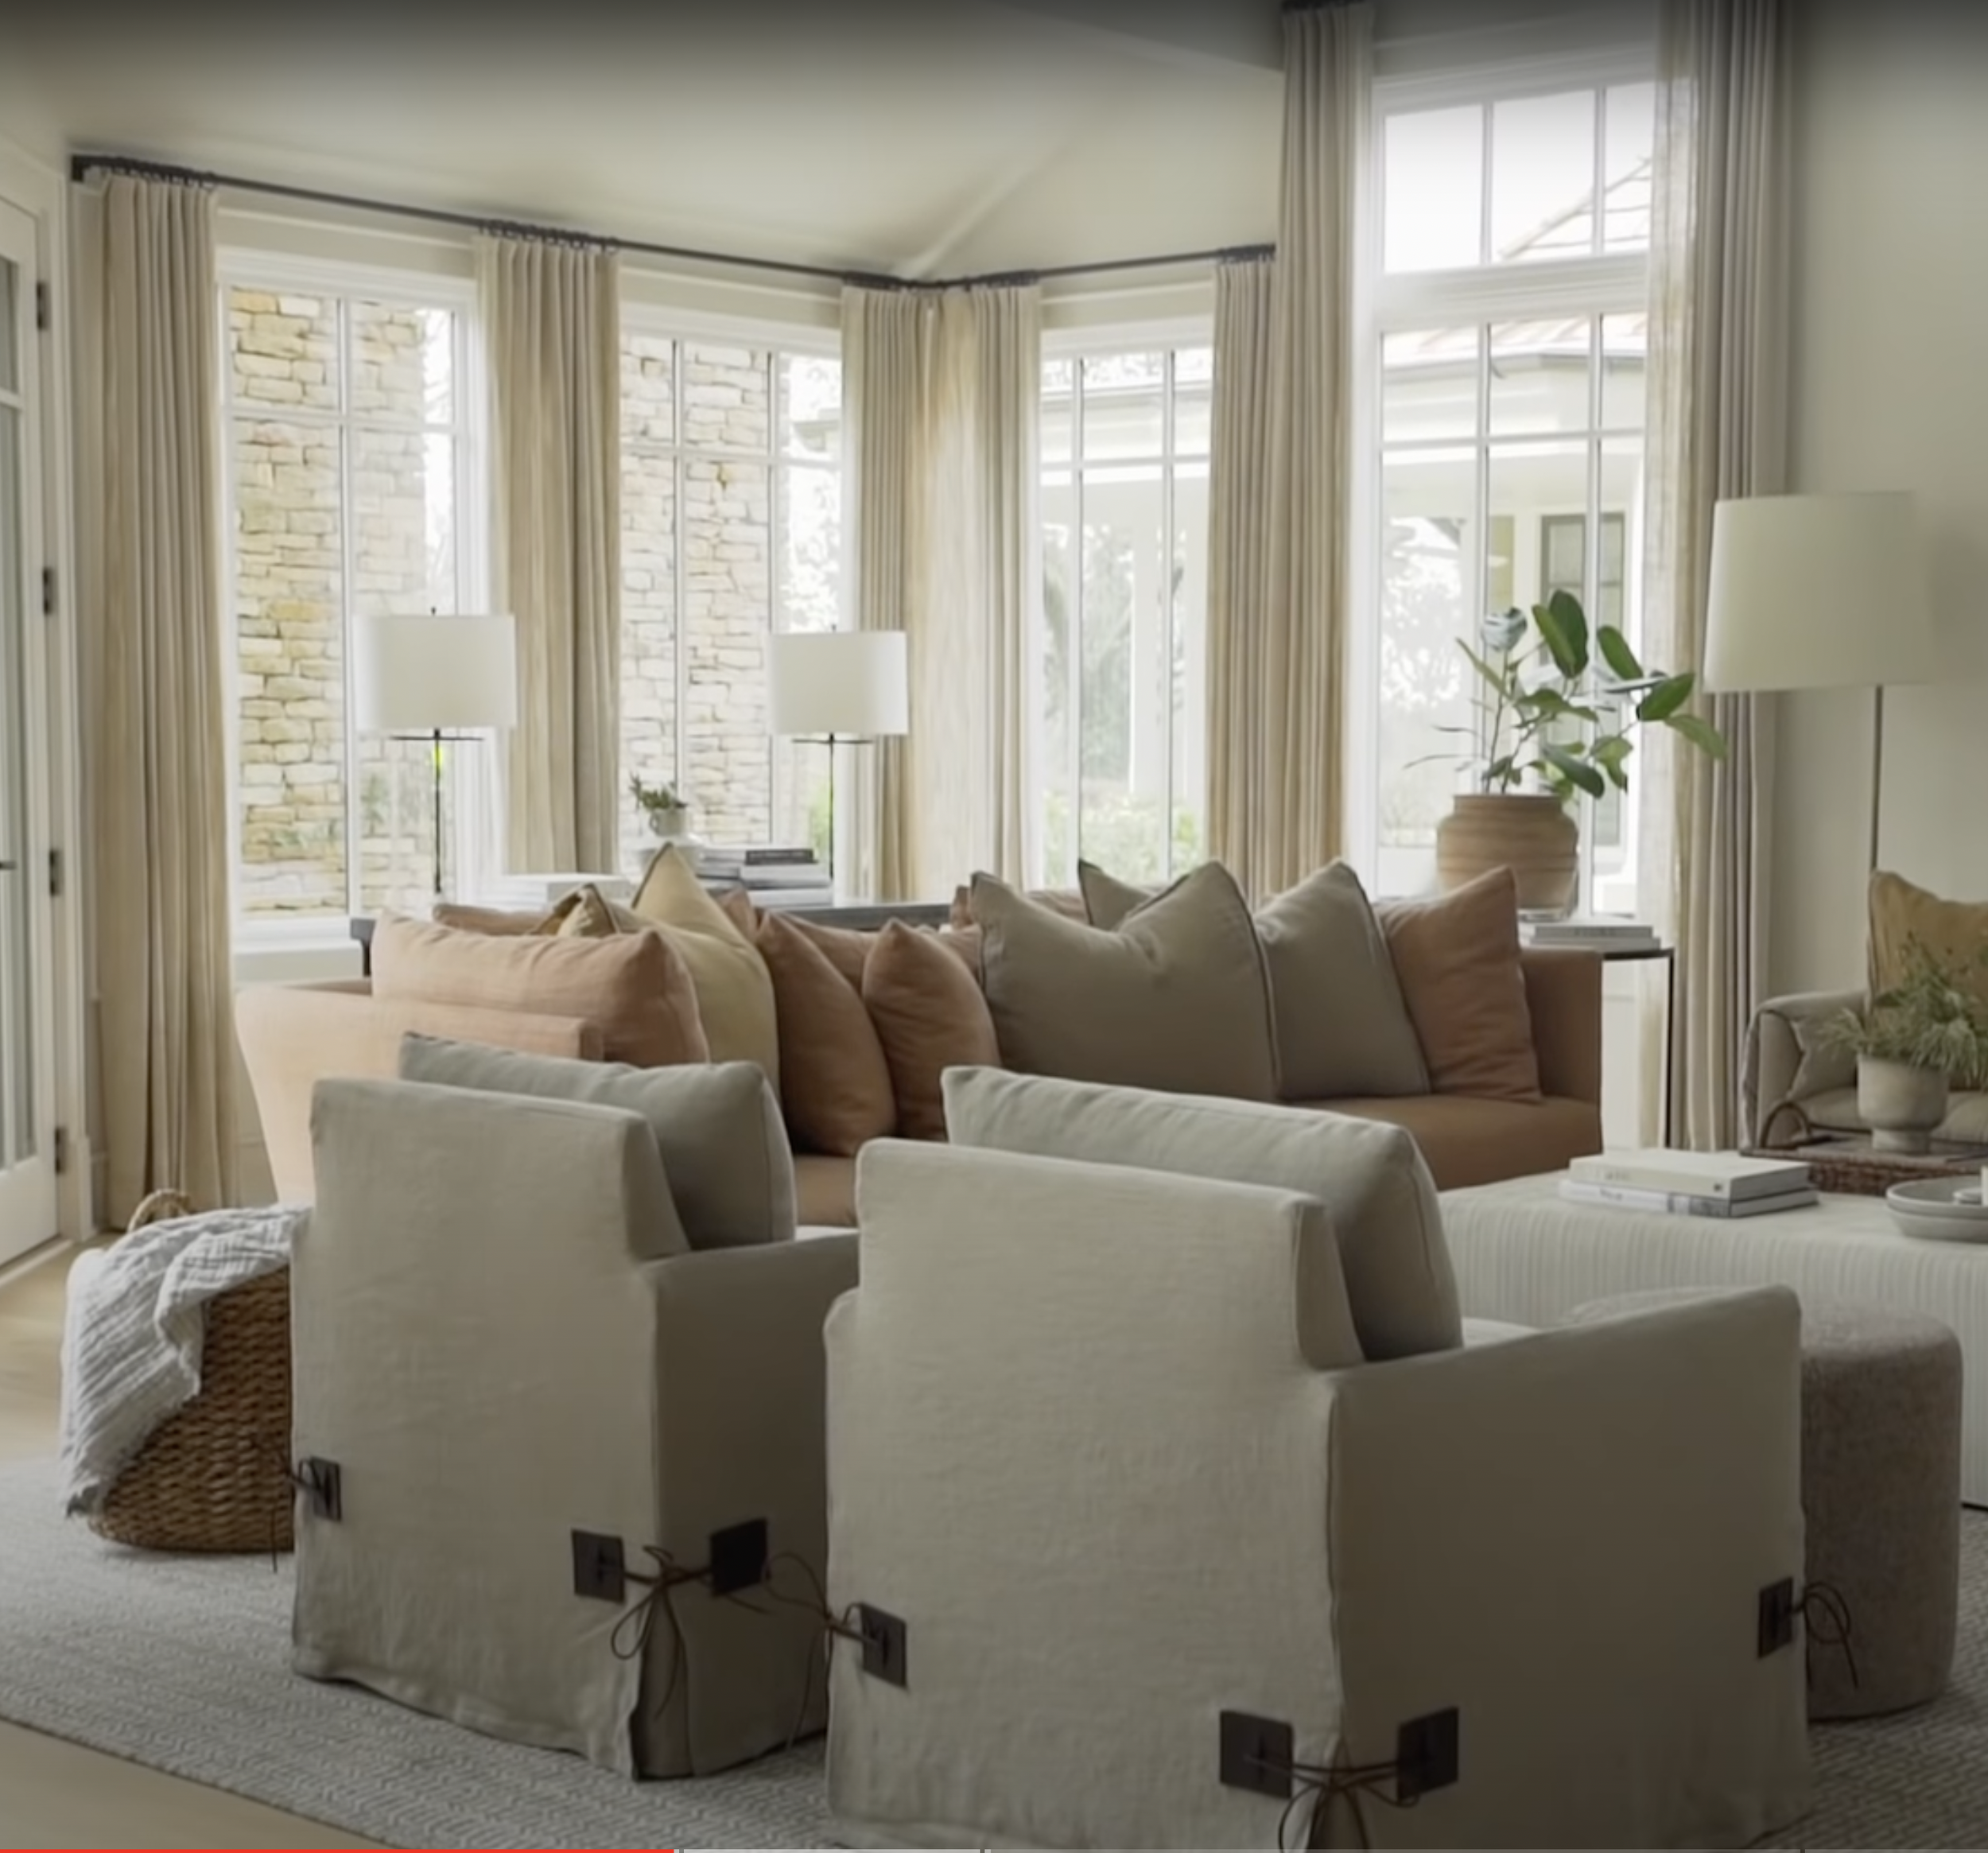 YOUTUBE HOME TOUR: OUTSKIRTS by APRIL TOMLIN INTERIORS